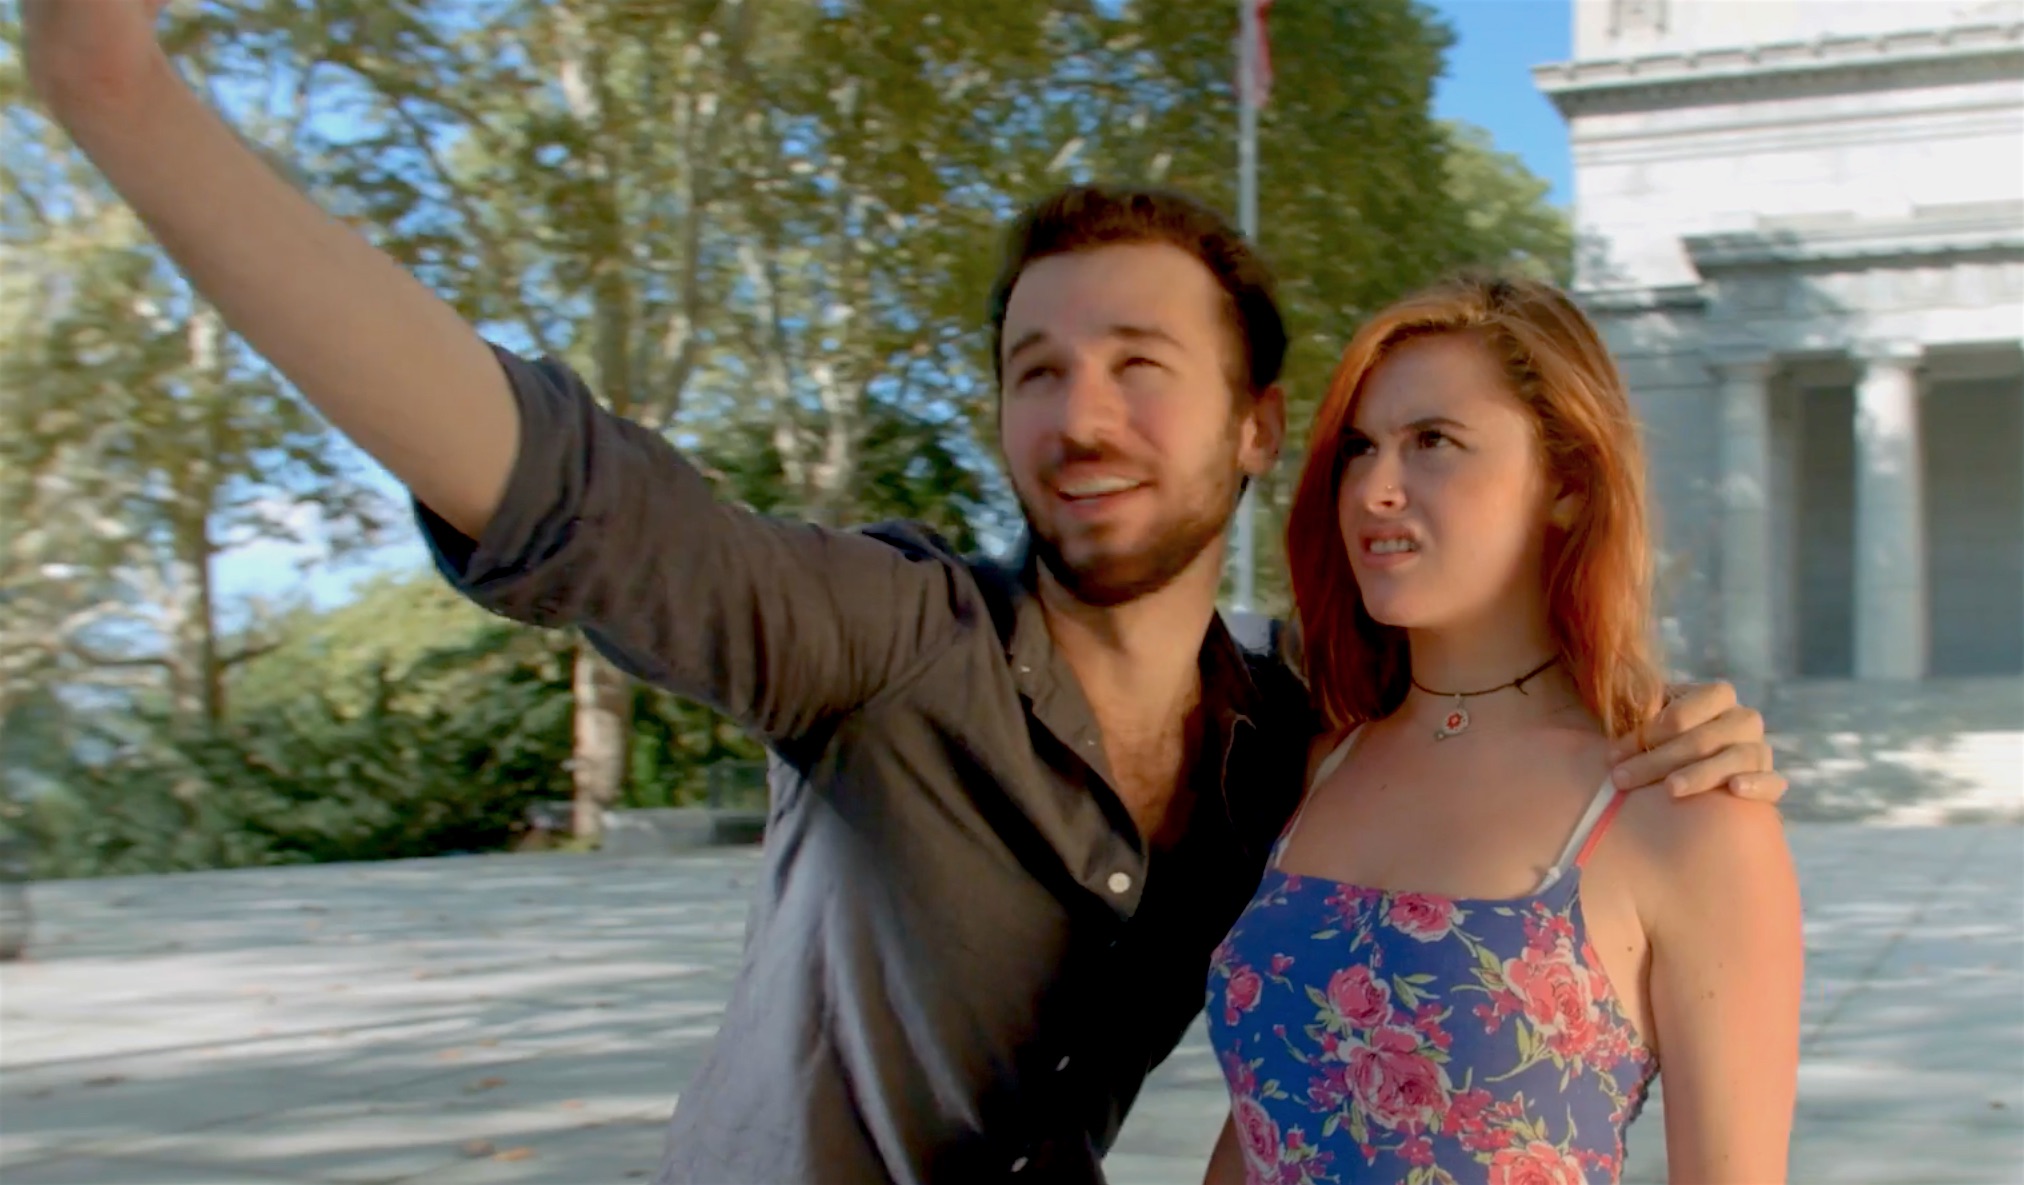 A musical tribute to the selfie